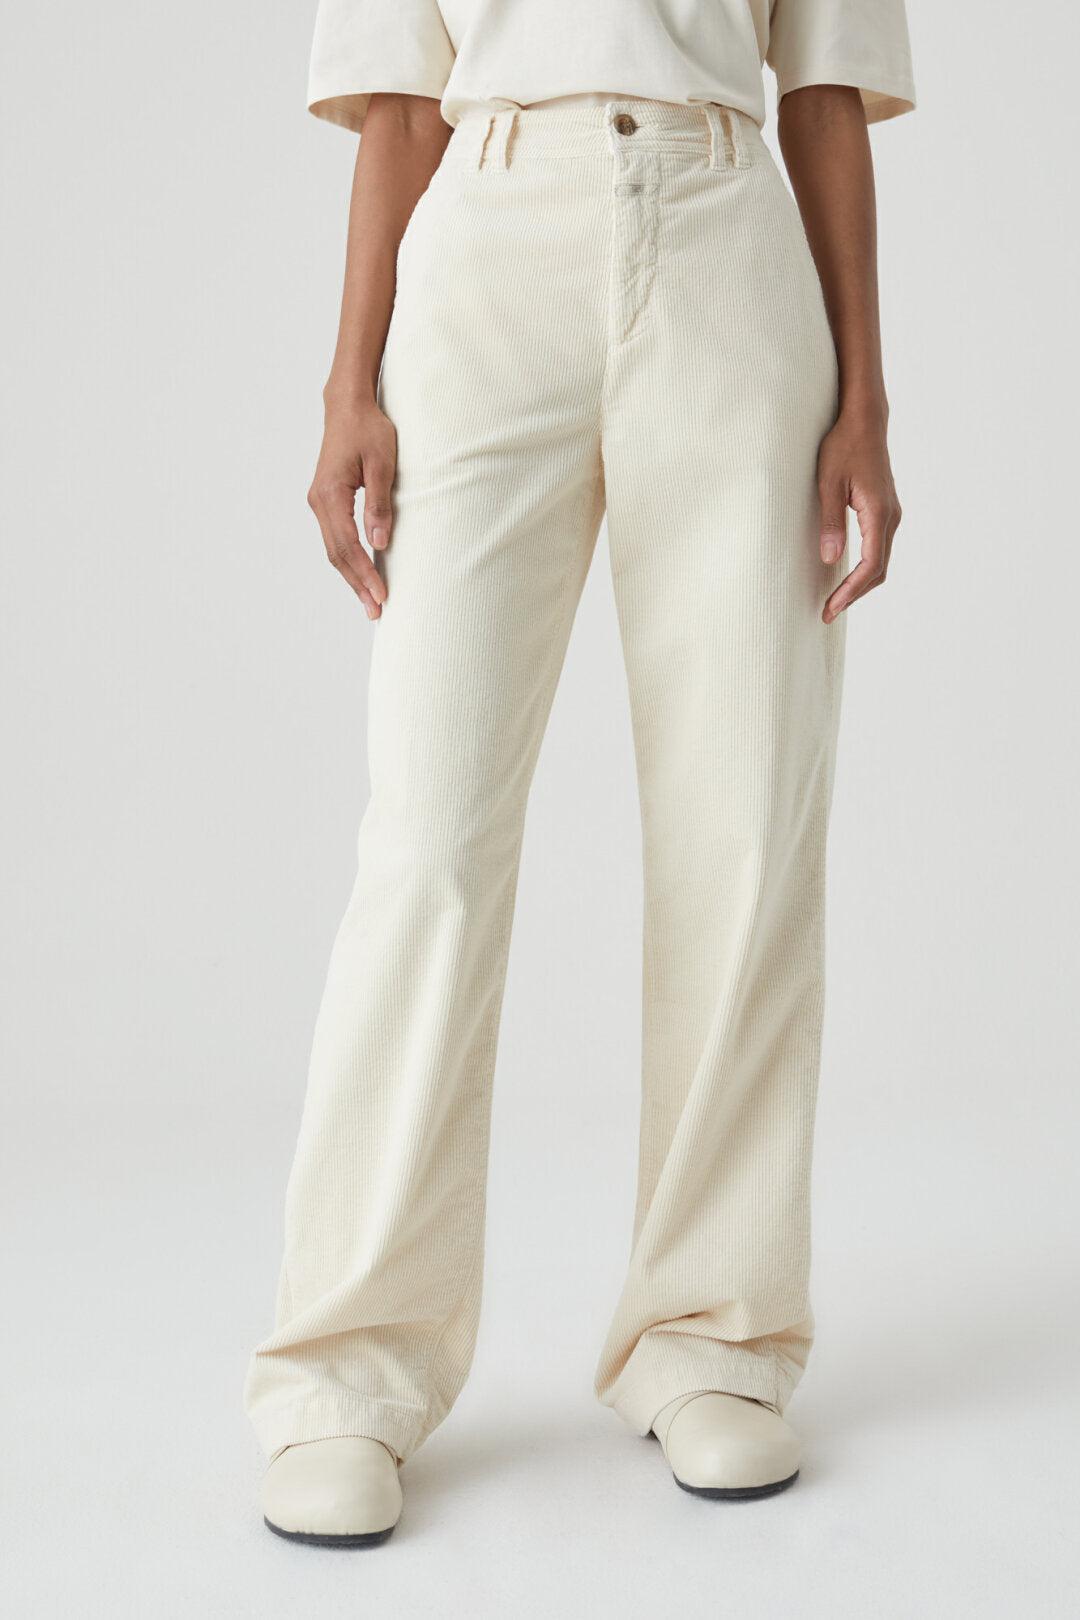 Manufactuur-Trousers Braden-Trousers-Closed